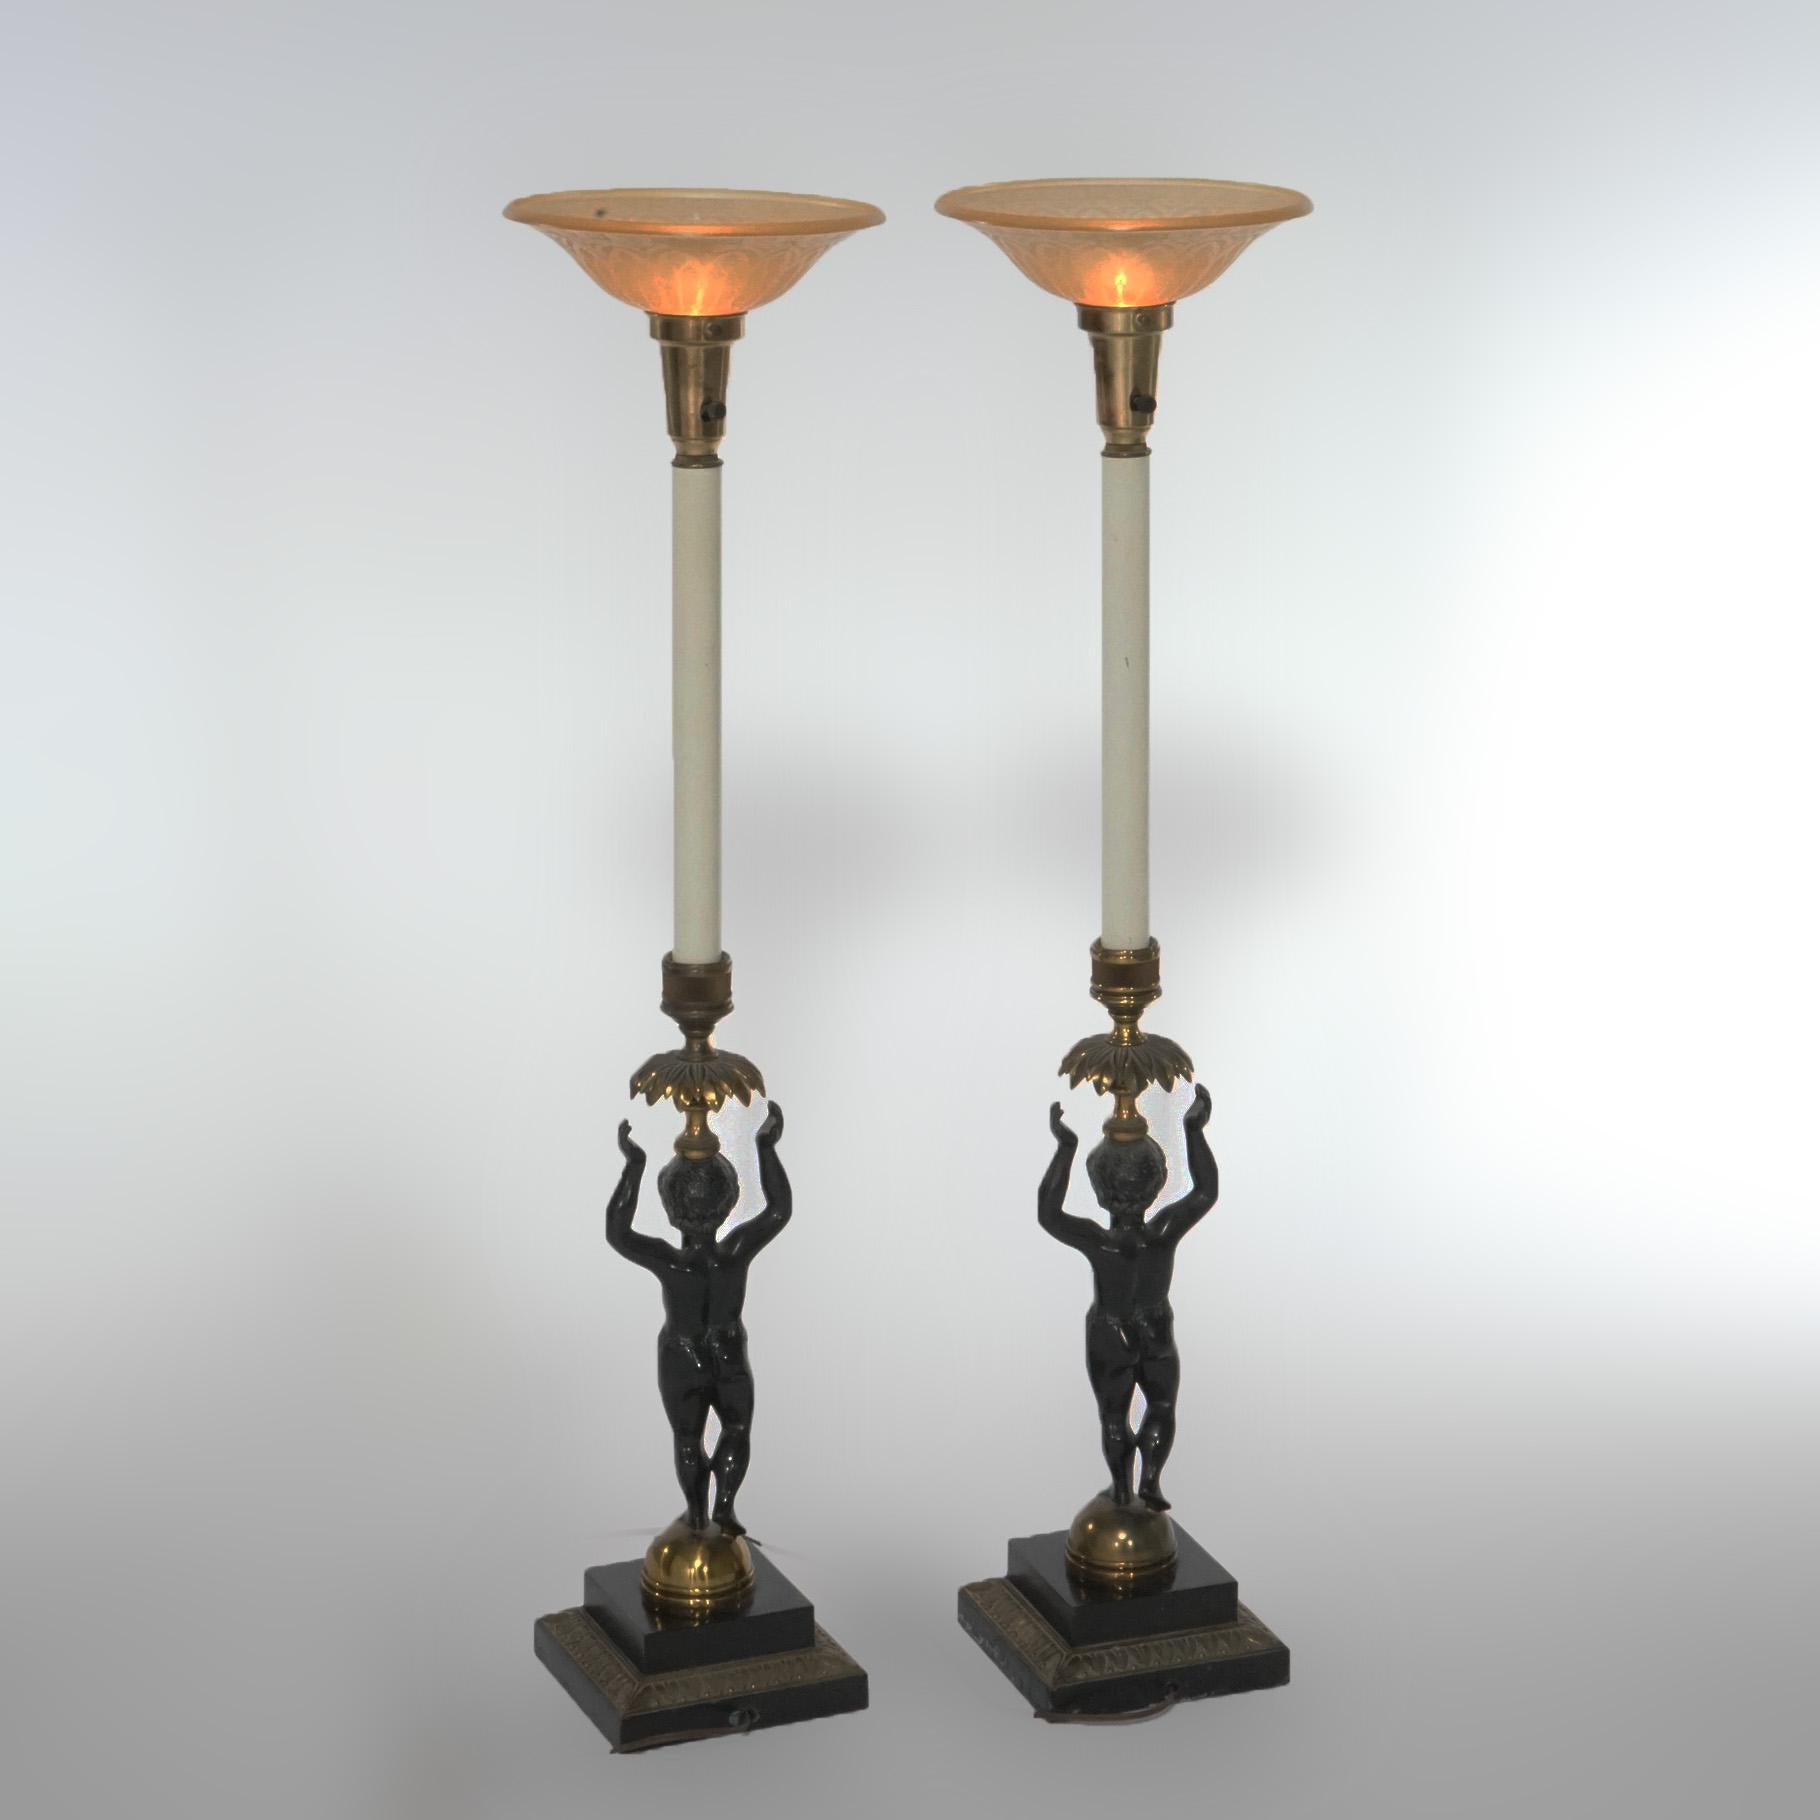 A pair of figural banquet lamps offer torchiere form with ebonized figural cherub column support, gilt foliate accents, 20th century.

Measures- 39''H x 7''W x 7''D.